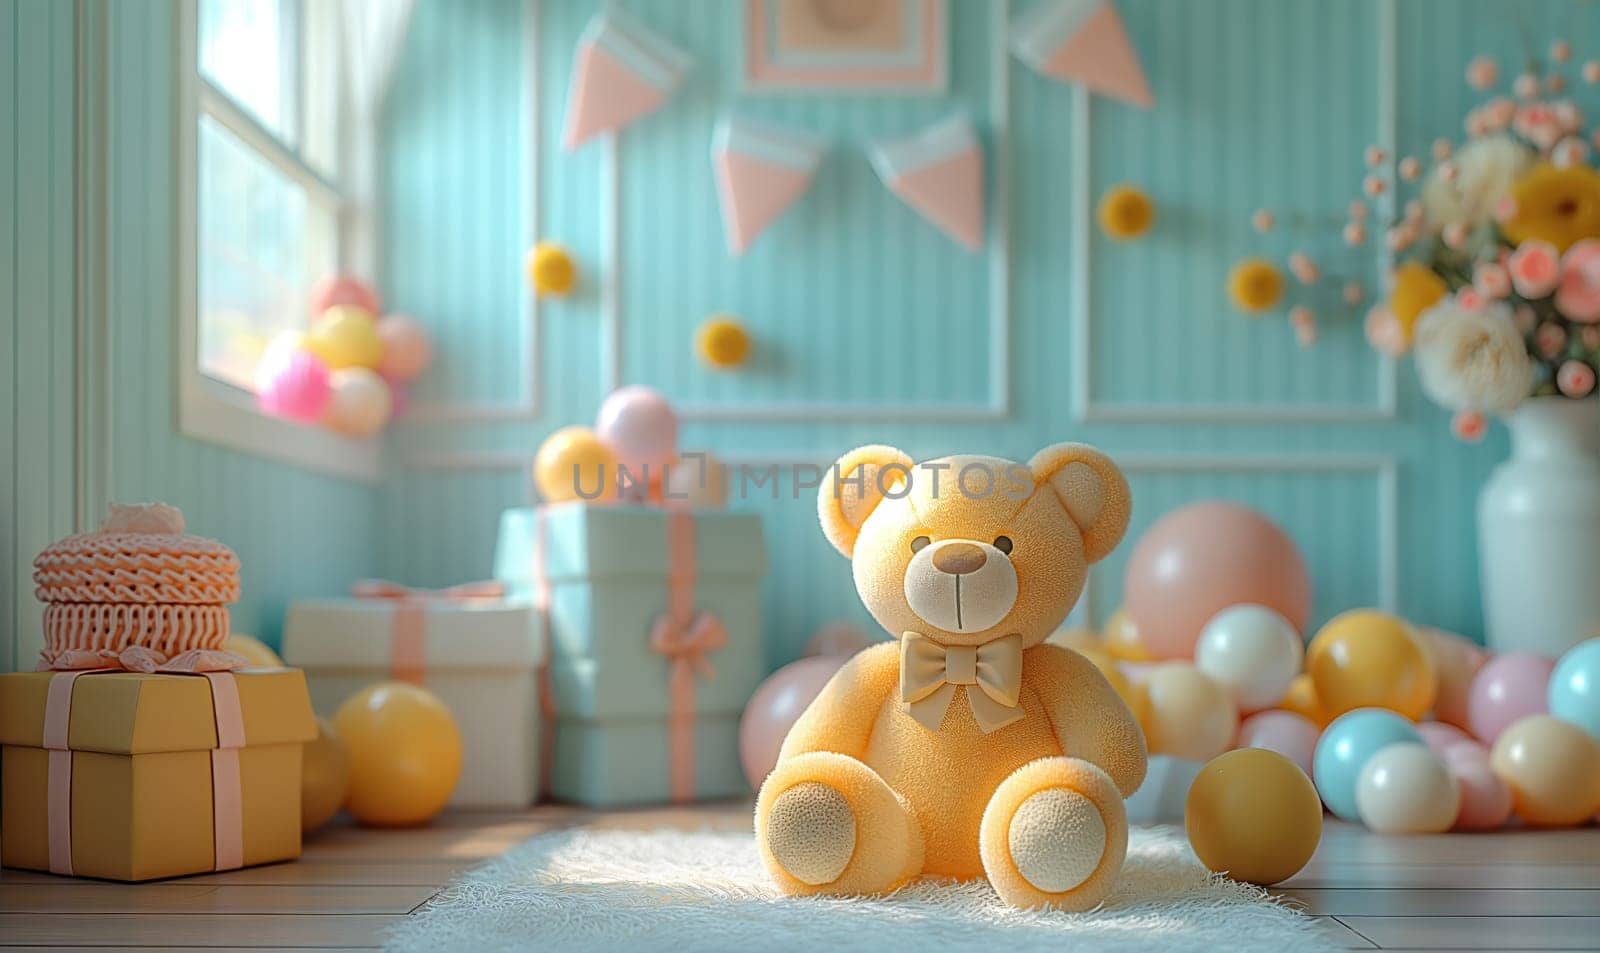 Illustration of a teddy bear with balloons in the room. by Fischeron